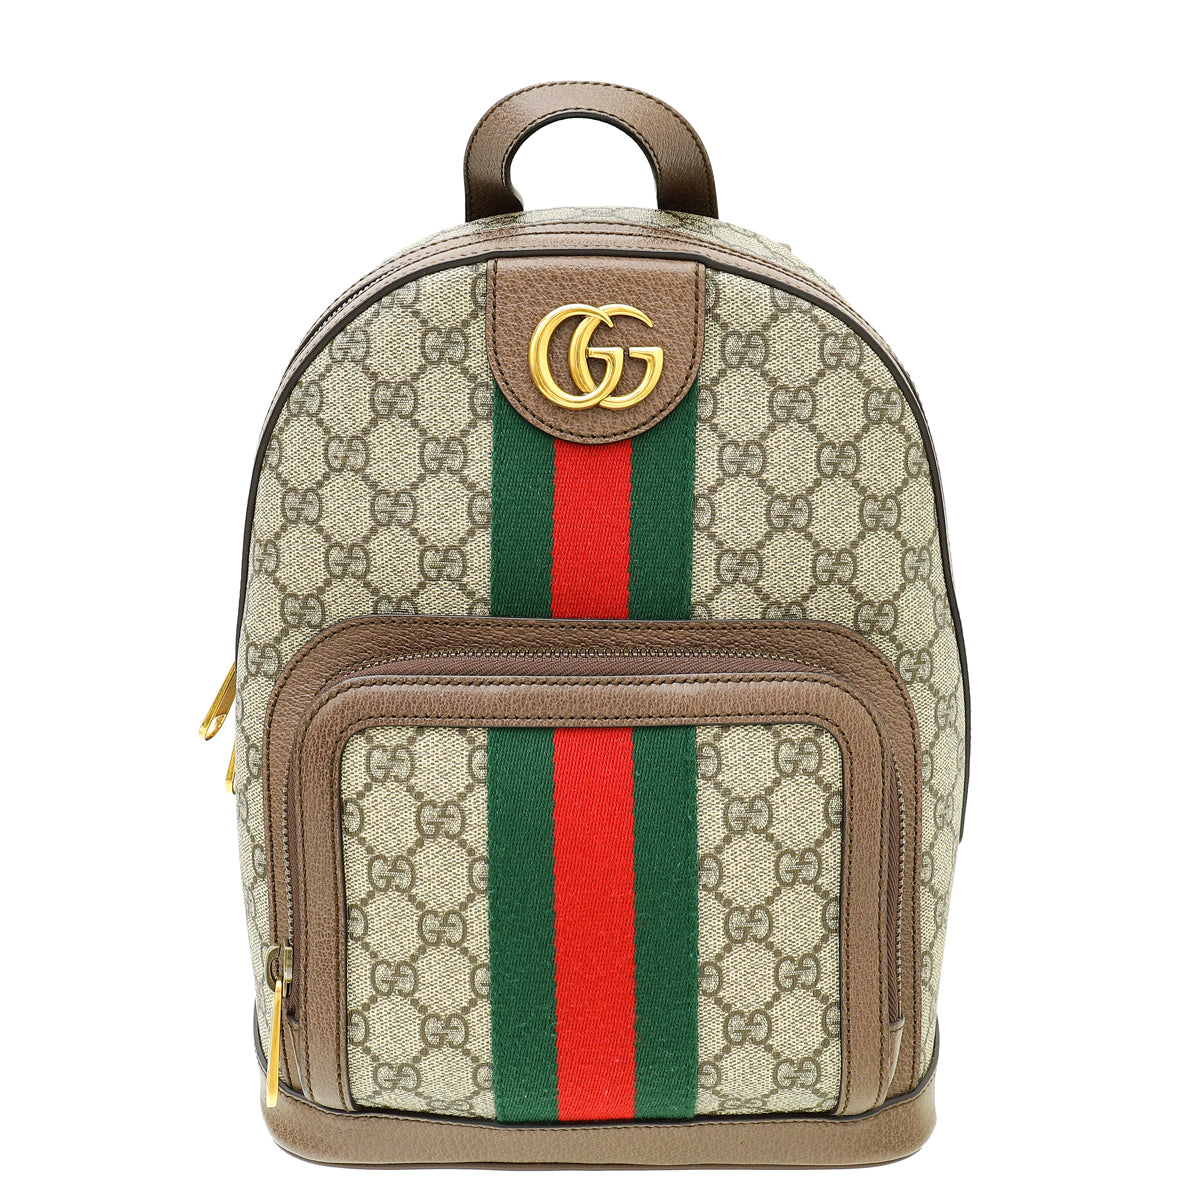 Gucci Bicolor GG Supreme Ophidia Small Backpack Bag